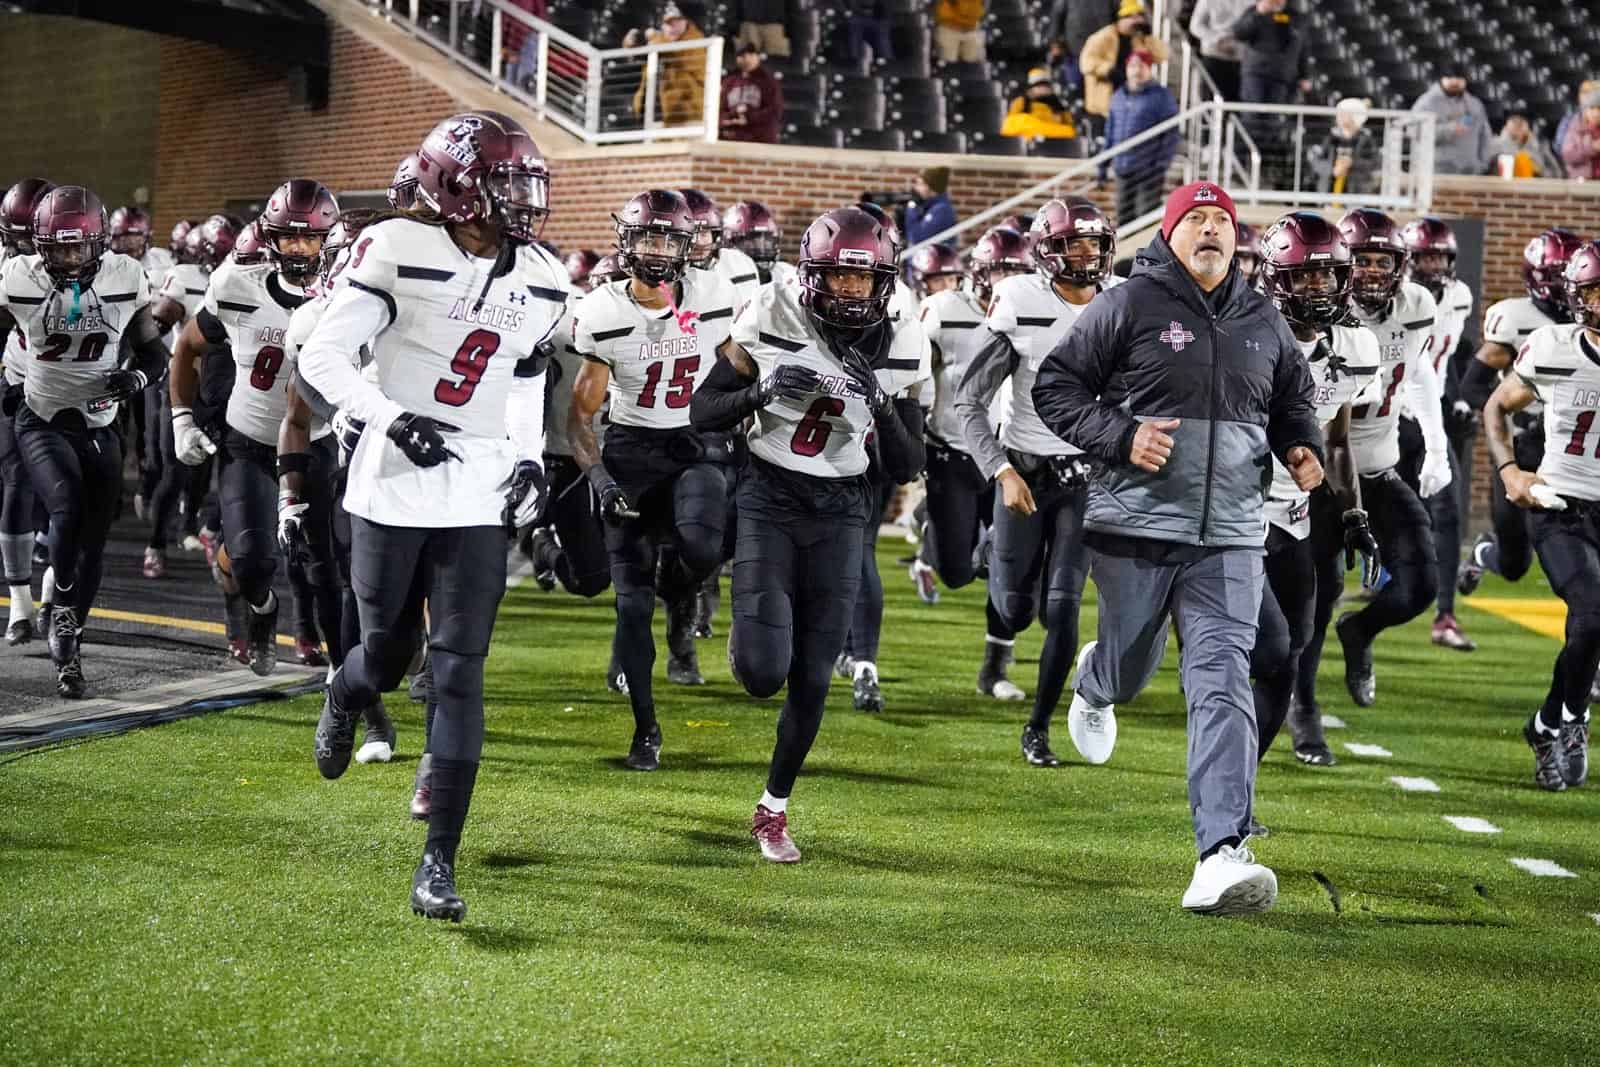 New Mexico State adds Valparaiso to 2022 football schedule